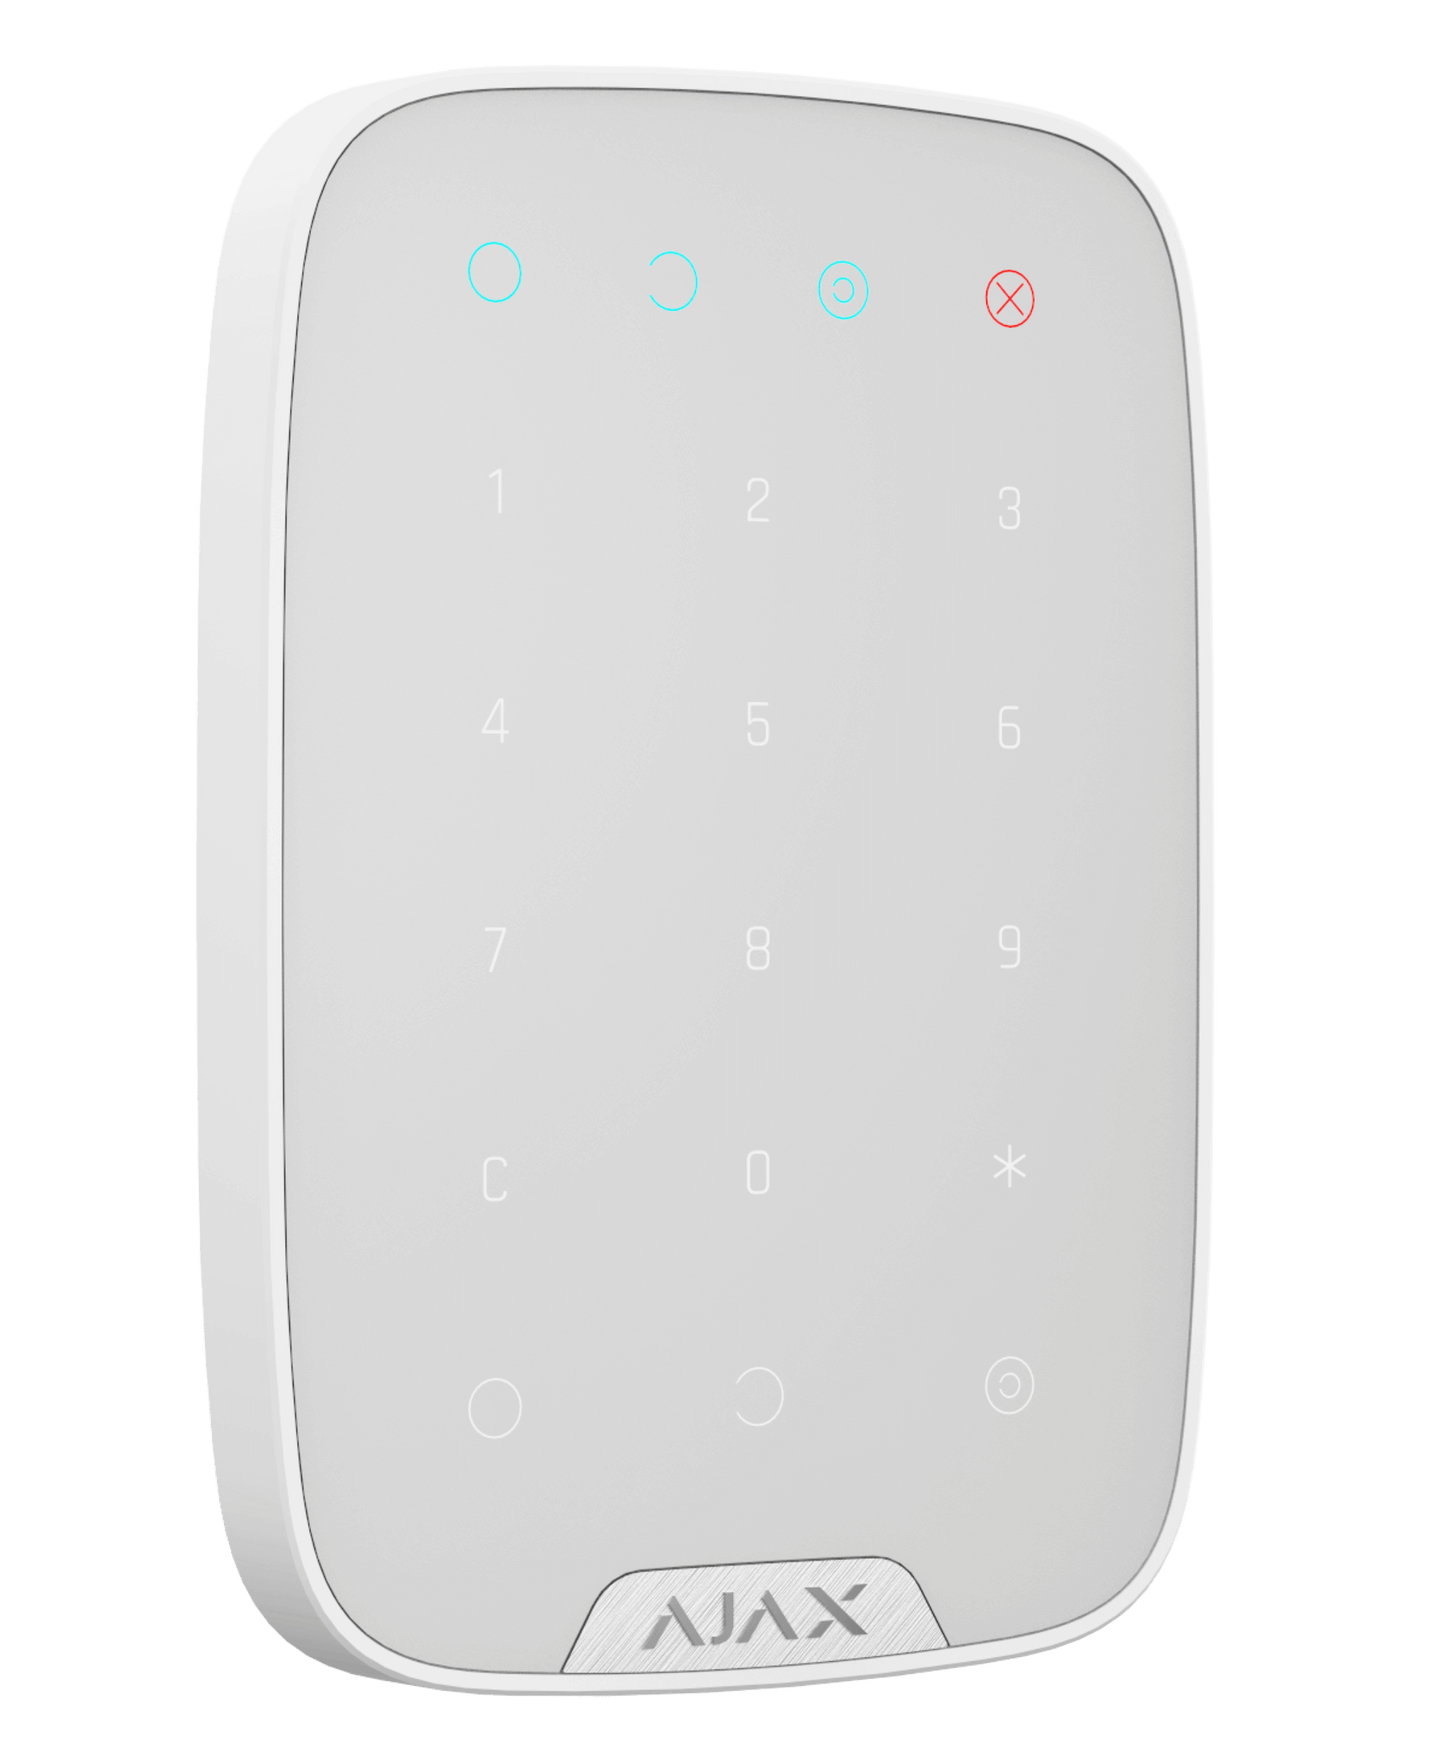 White Ajax KeyPad a practical numerical keypad for alarm system control,  150 × 103 × 14 mm in size , 197grams in weight for smart home and business security, turned view